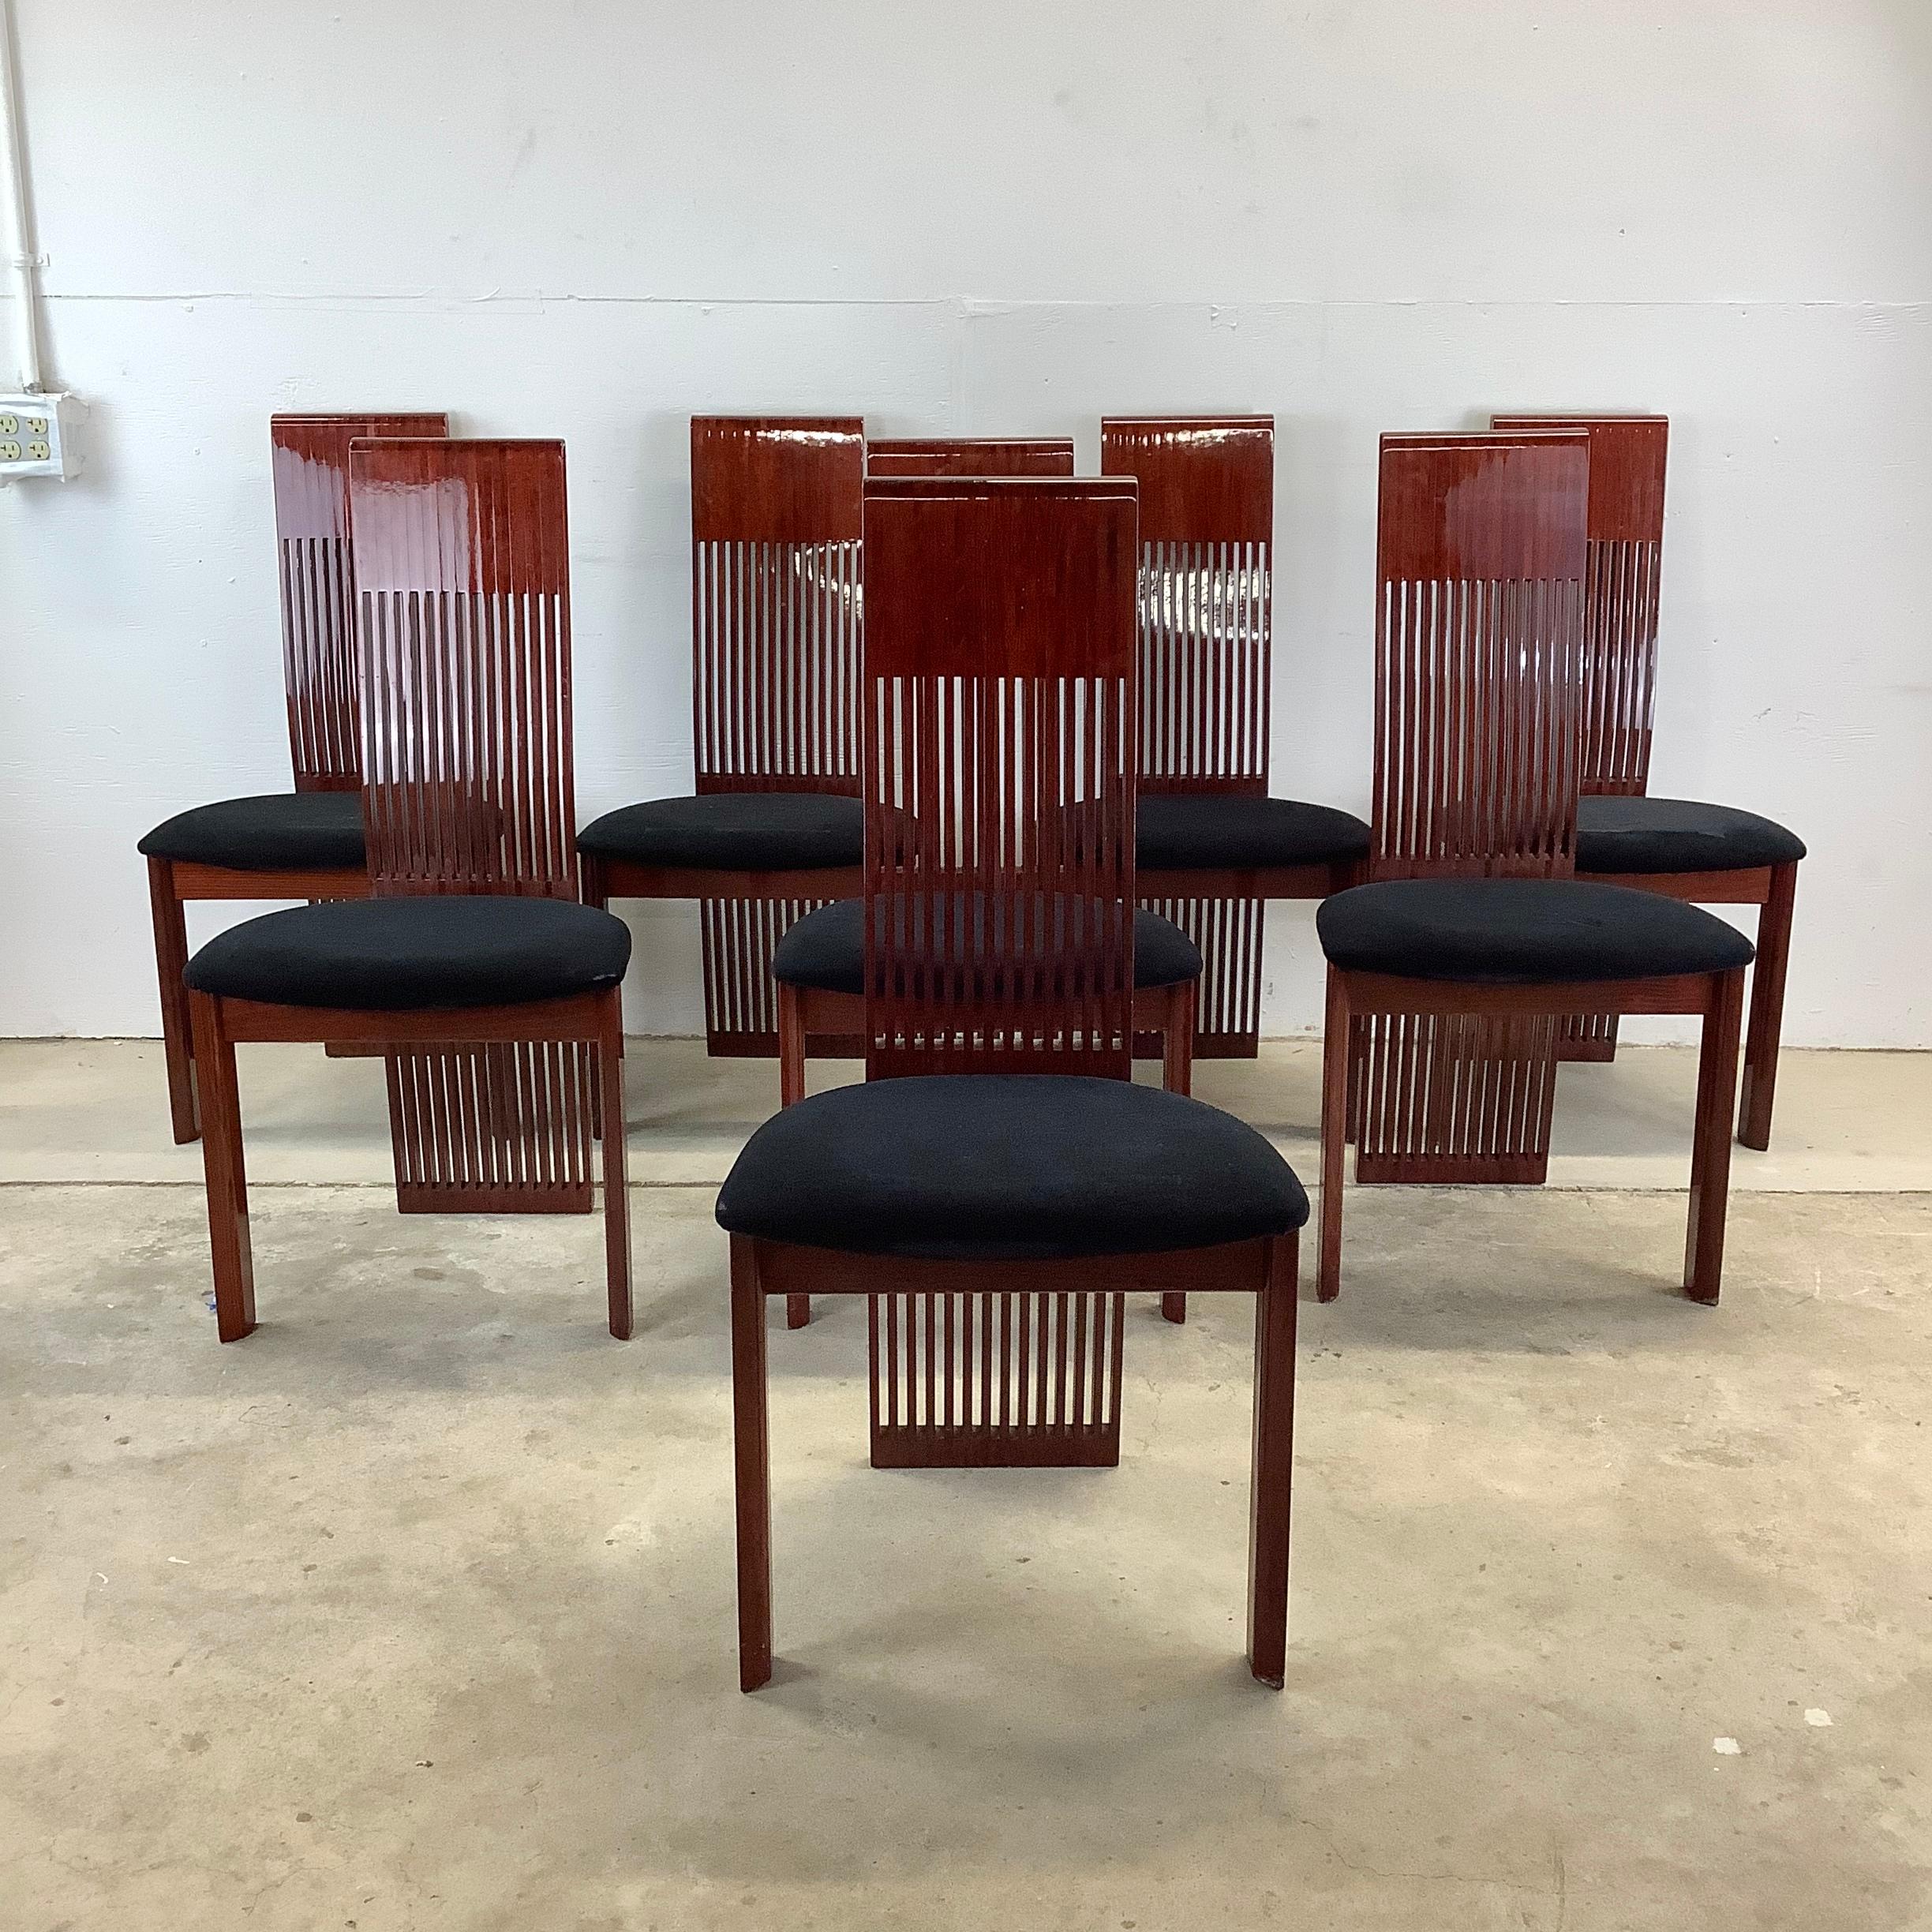 Experience the Legacy of Italian Craftsmanship with this matching set of 8 Italian Modern dining chairs- 

Introducing this set of eight exquisite chairs, attributed to(unmarked) the renowned Italian design of Pietro Costantini. These chairs,